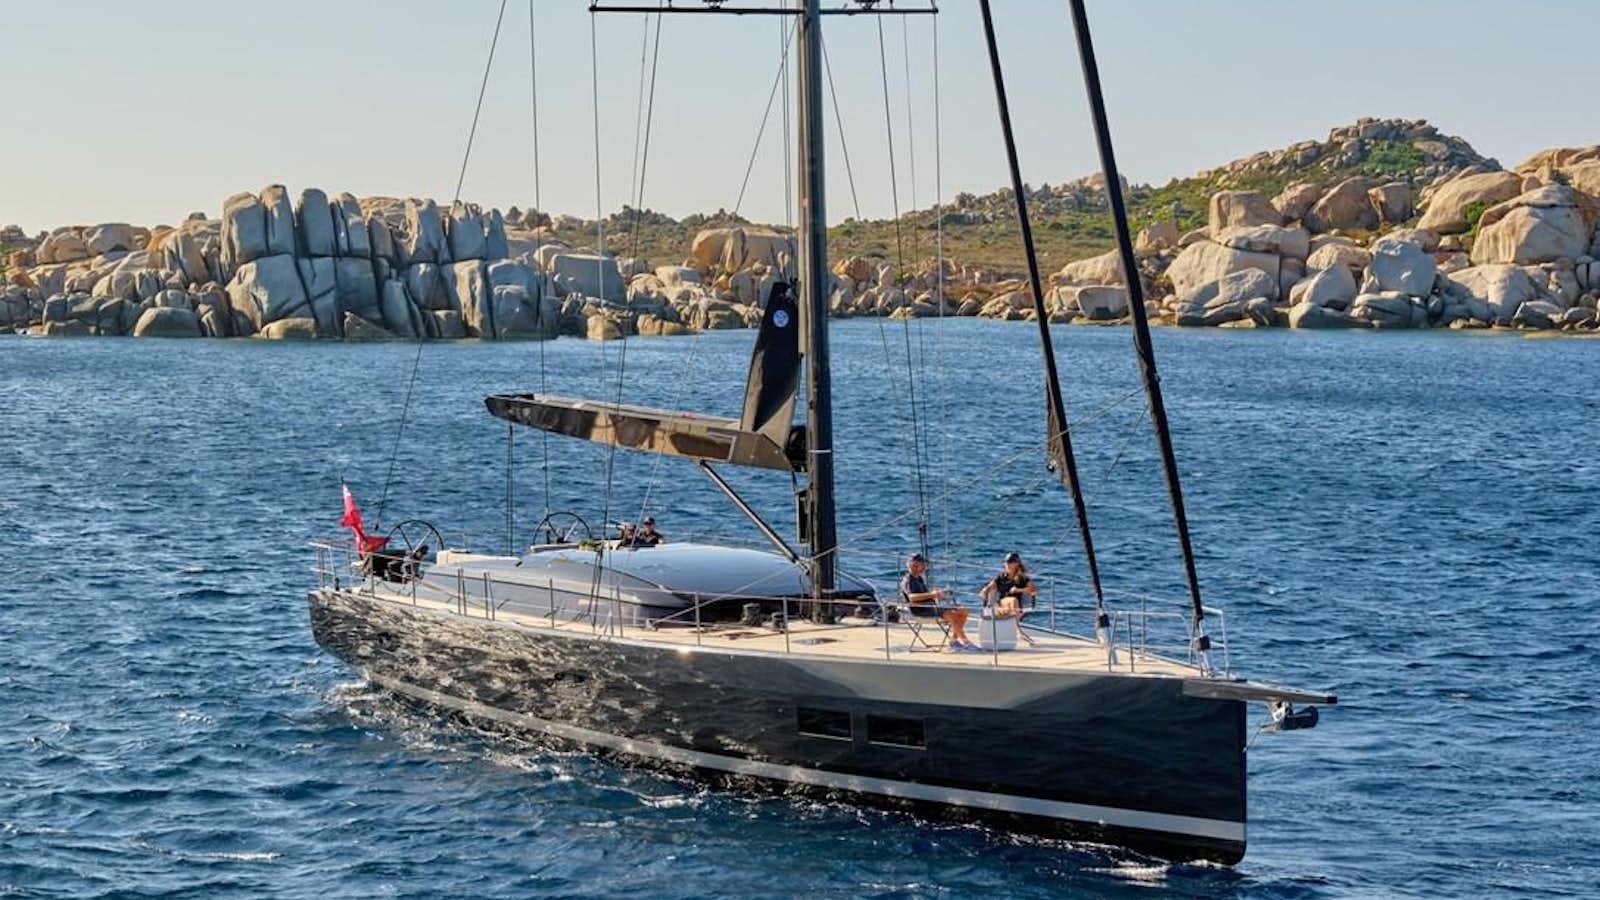 Cnb 78 new order
Yacht for Sale